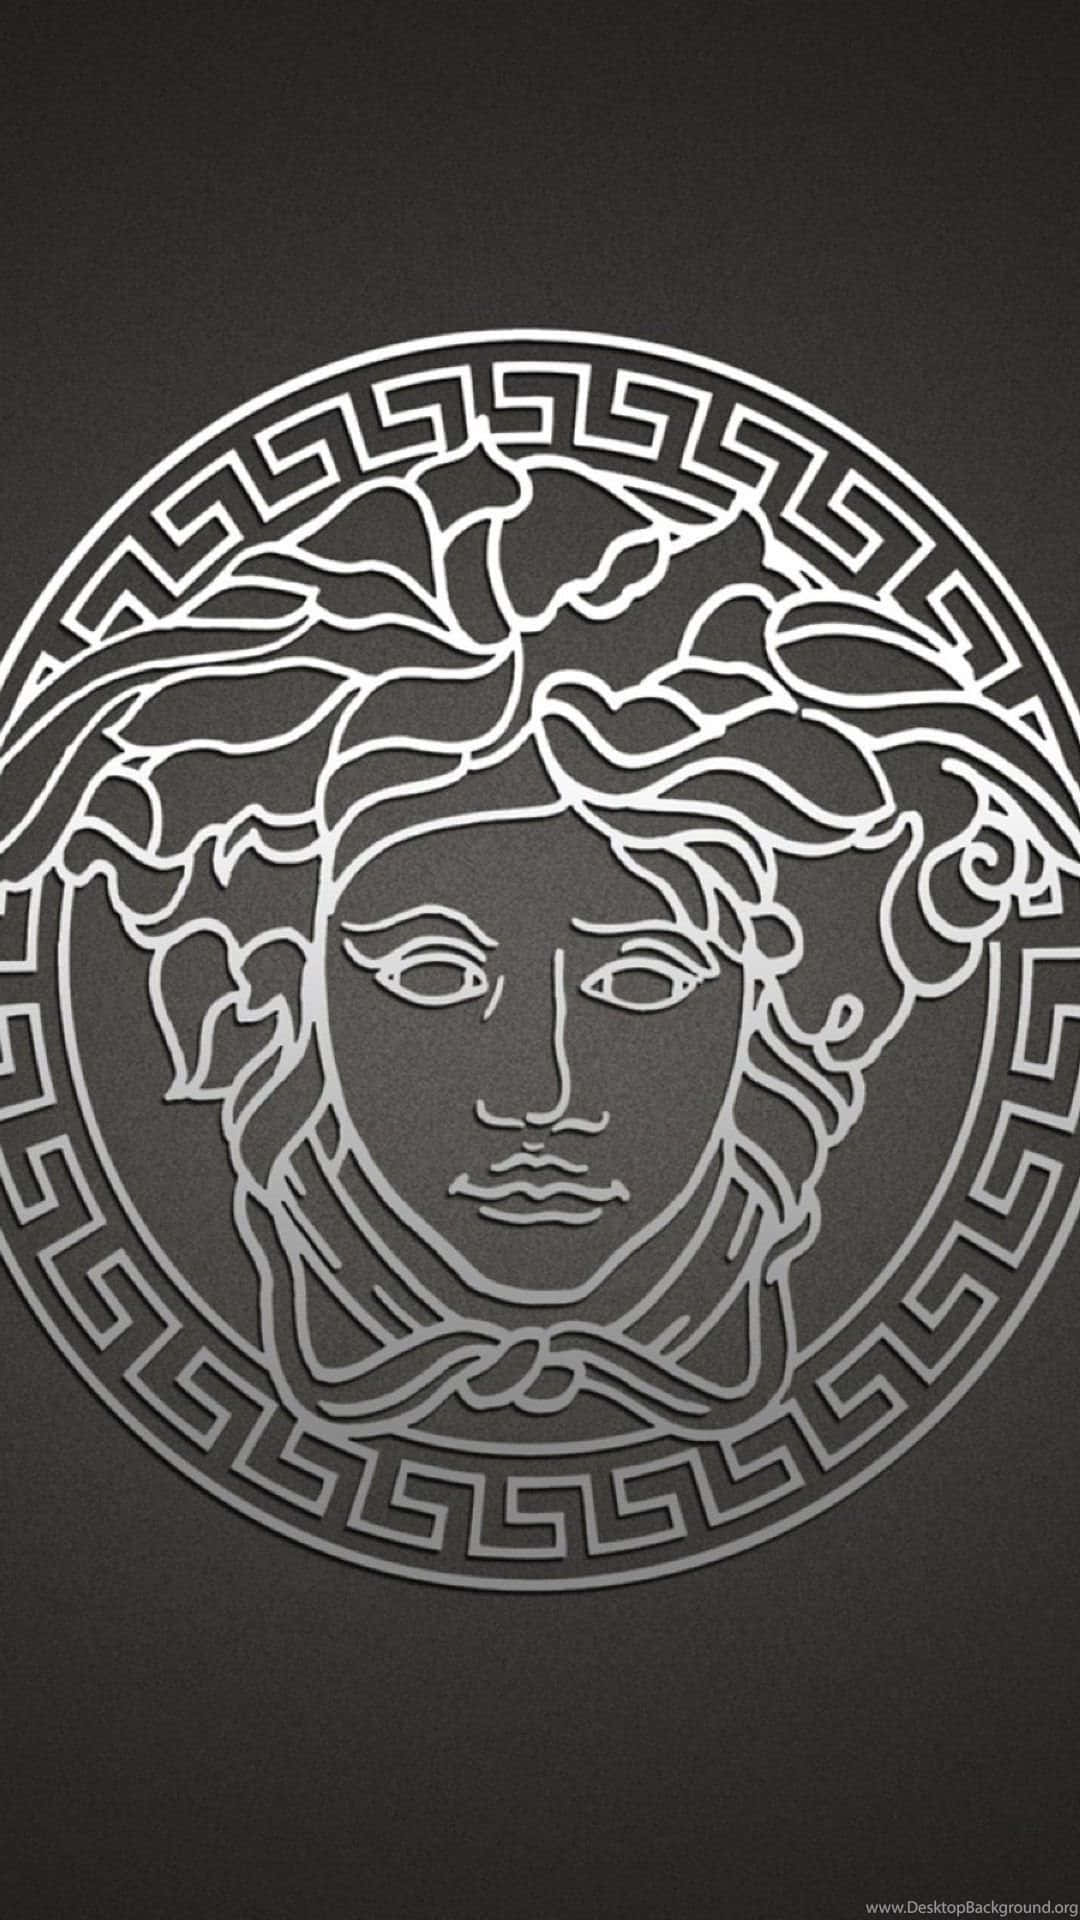 Download A White And Black Design Of A Medusa Head | Wallpapers.com